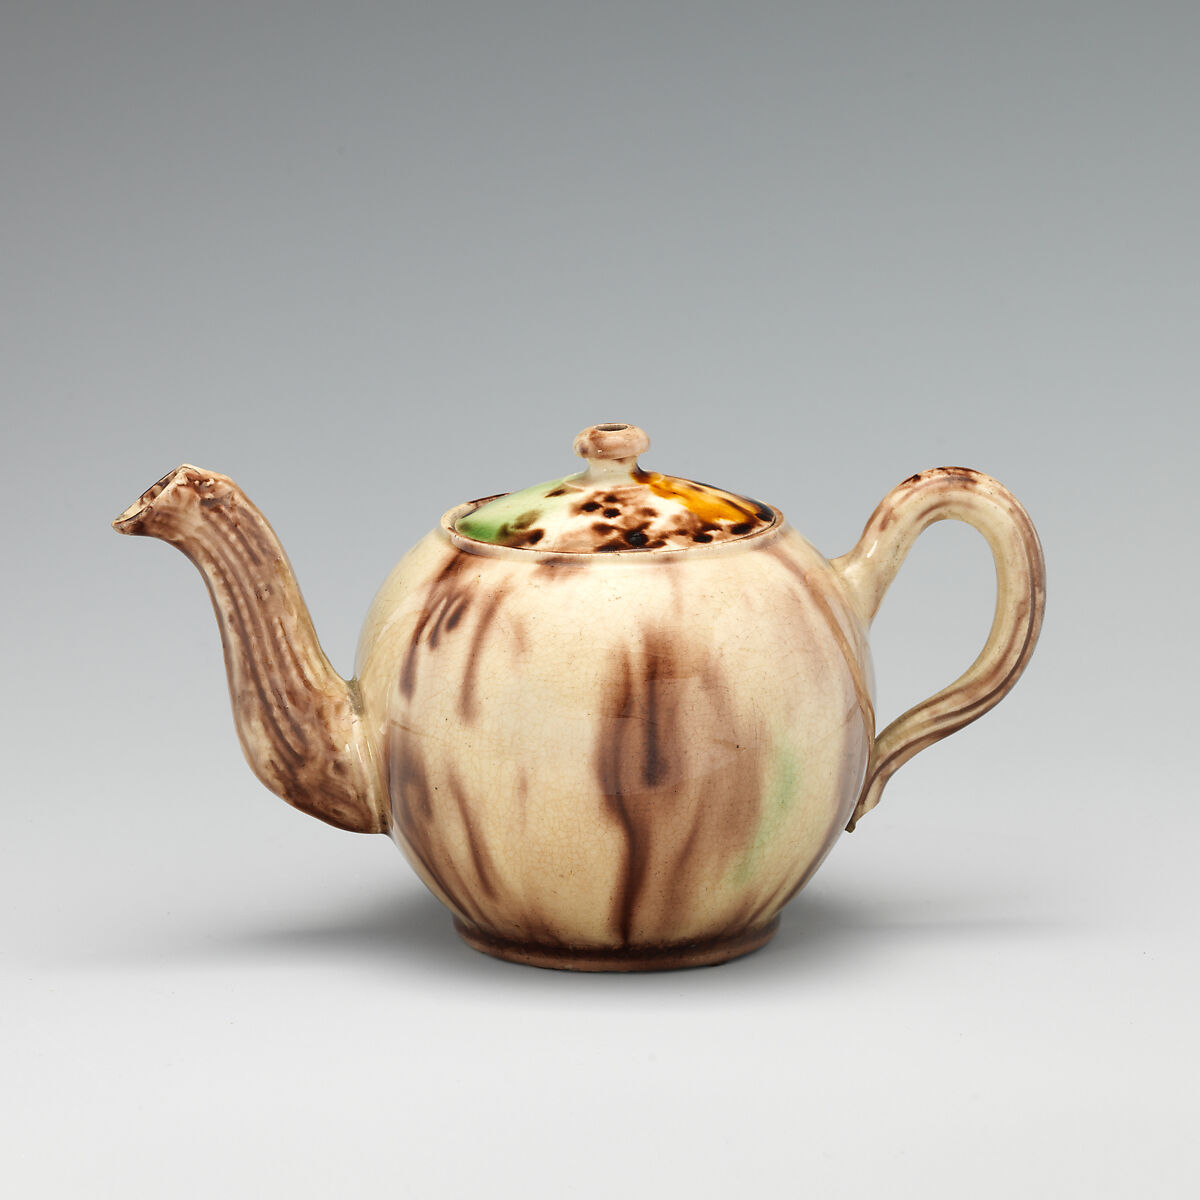 Teapot with cover, Style of Whieldon type, Lead-glazed earthenware, probably British, Staffordshire 